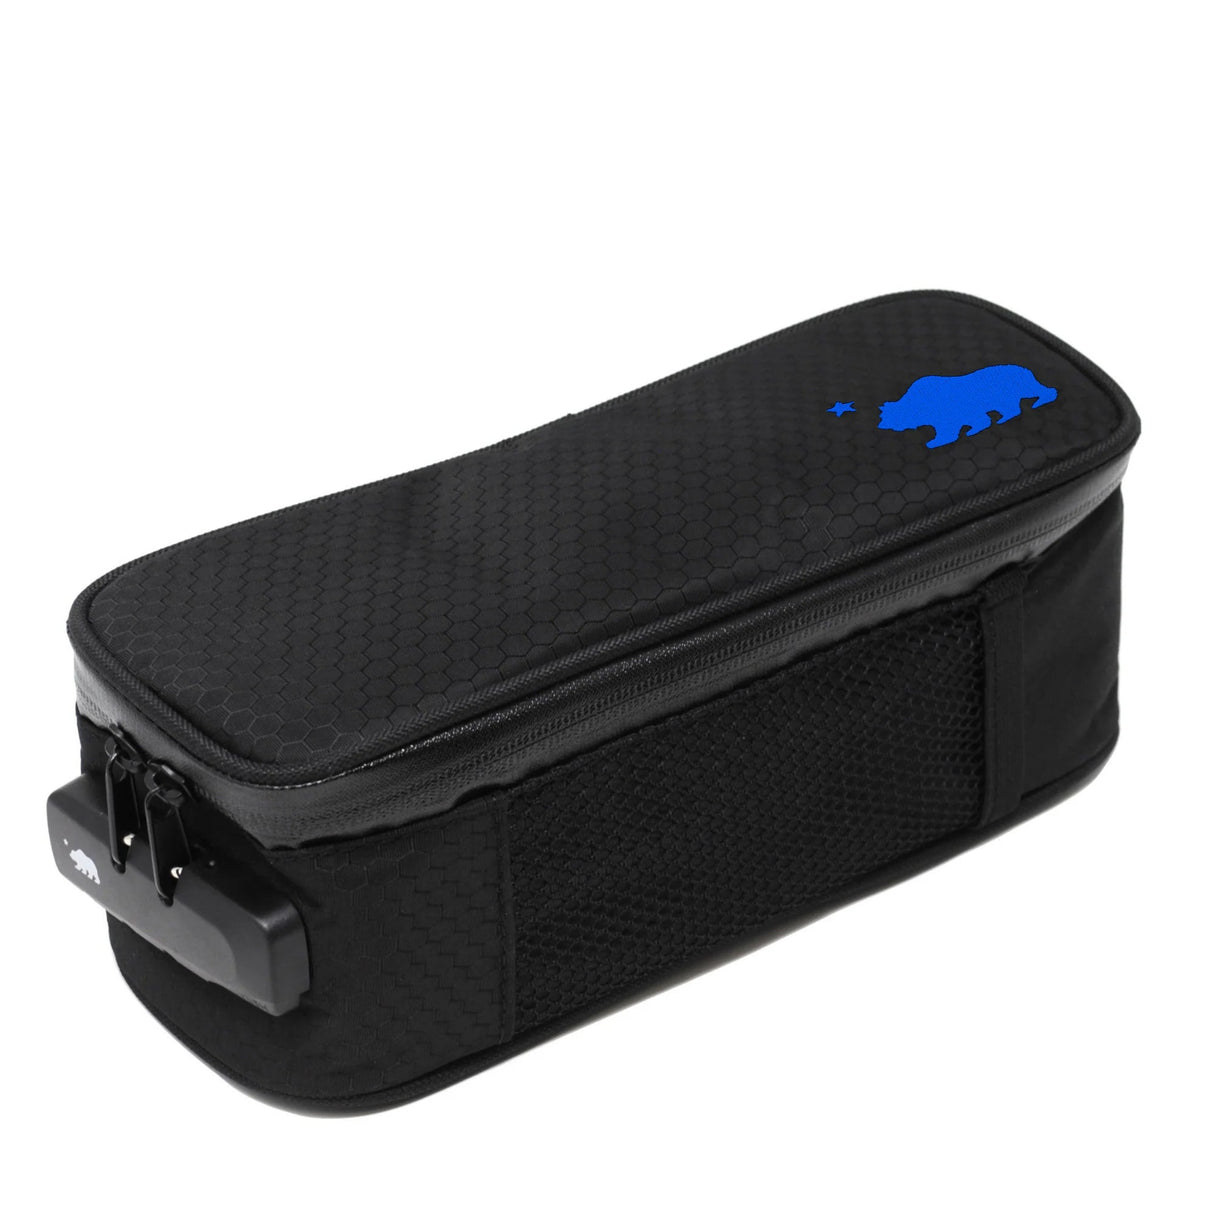 Cali Bags Cali Soft Case Small in black with blue logo, side view, silicone, smell-proof design